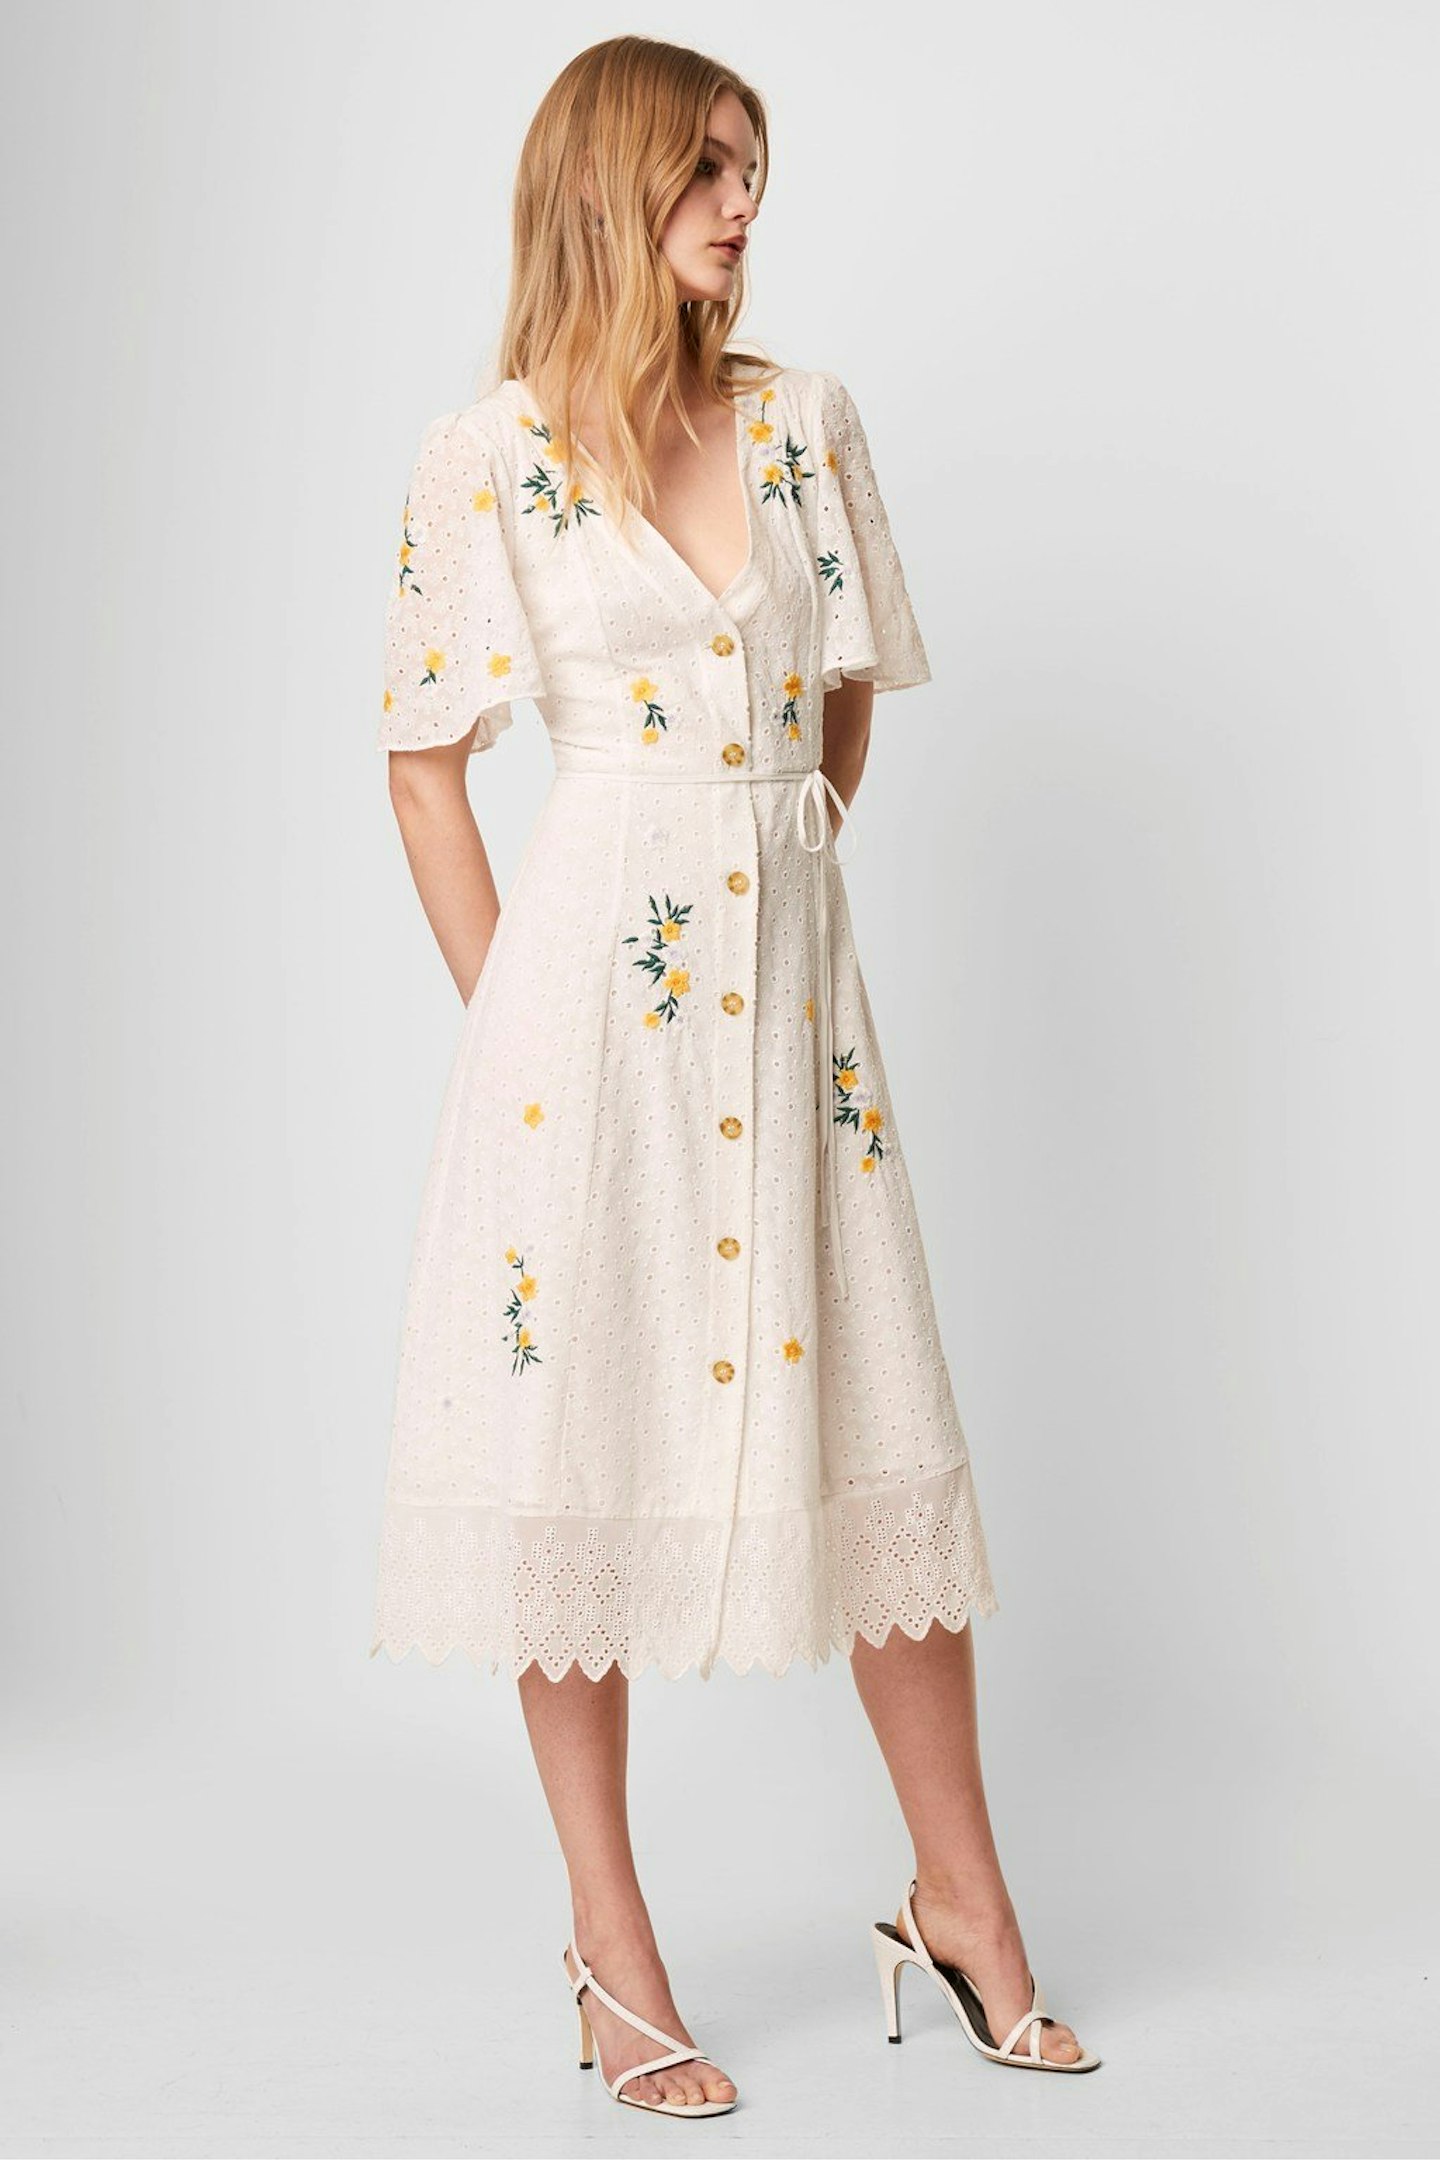 French Connection, Embroidered Dress,  £150